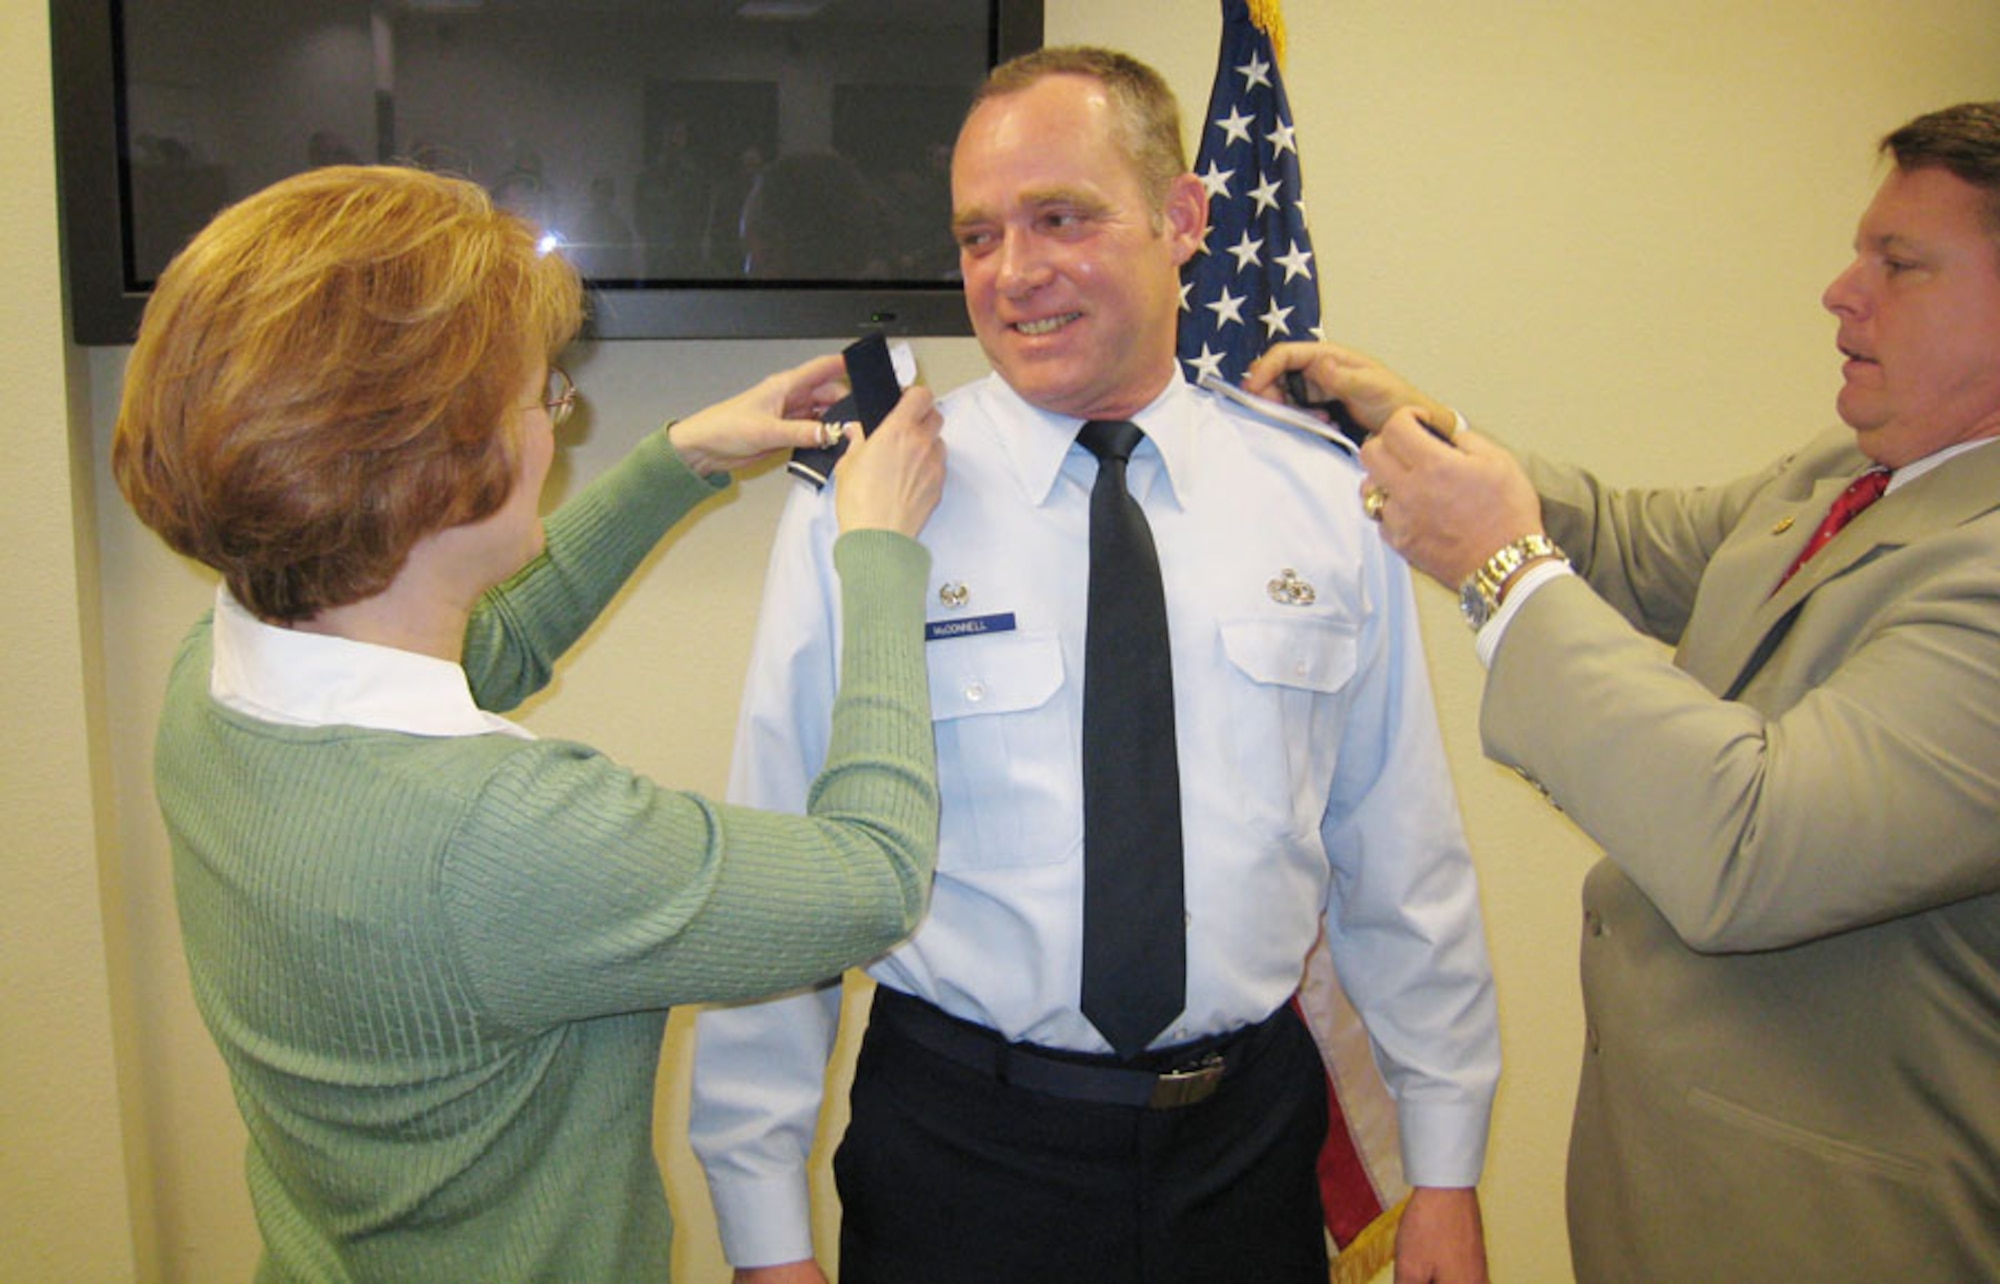 Col. James McDonnell, 507th Maintenance Group commander, recently pinned on his new rank with the help of his wife Wendy and Bill Frenier, former deputy commander for the 507th Maintenance Group.